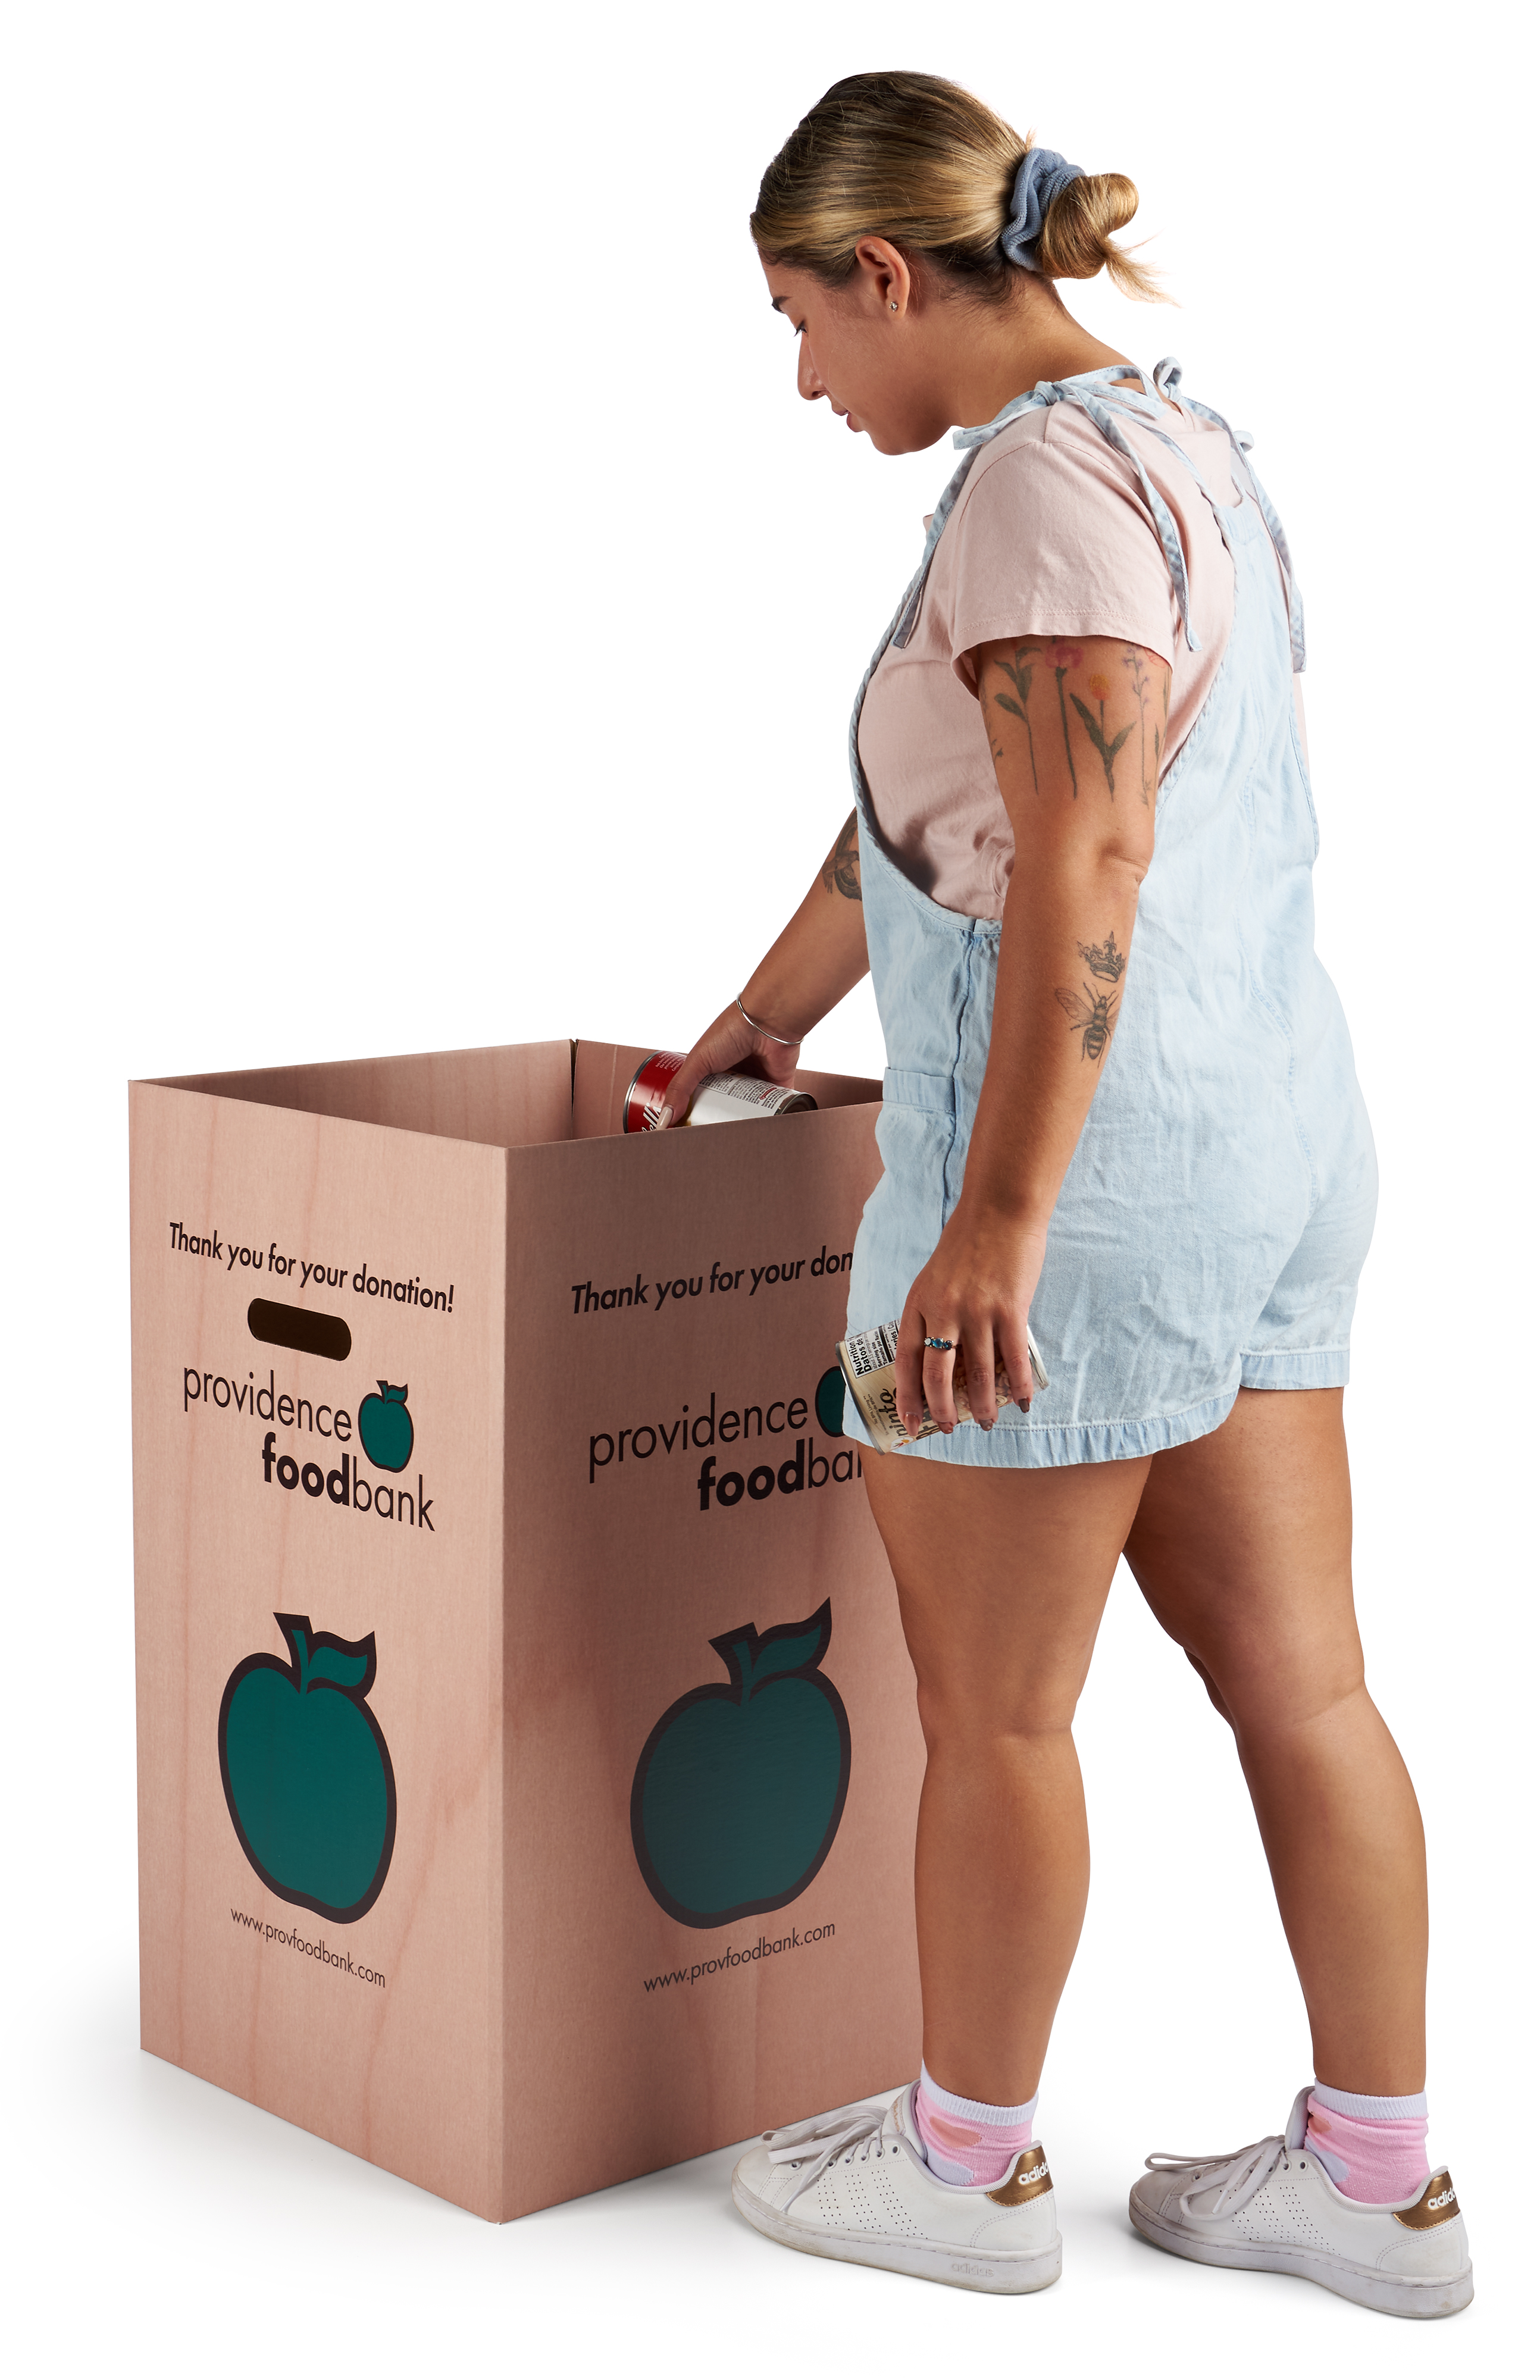 36.5 Gallons Custom Disposable Recyclable Cardboard Trash Can